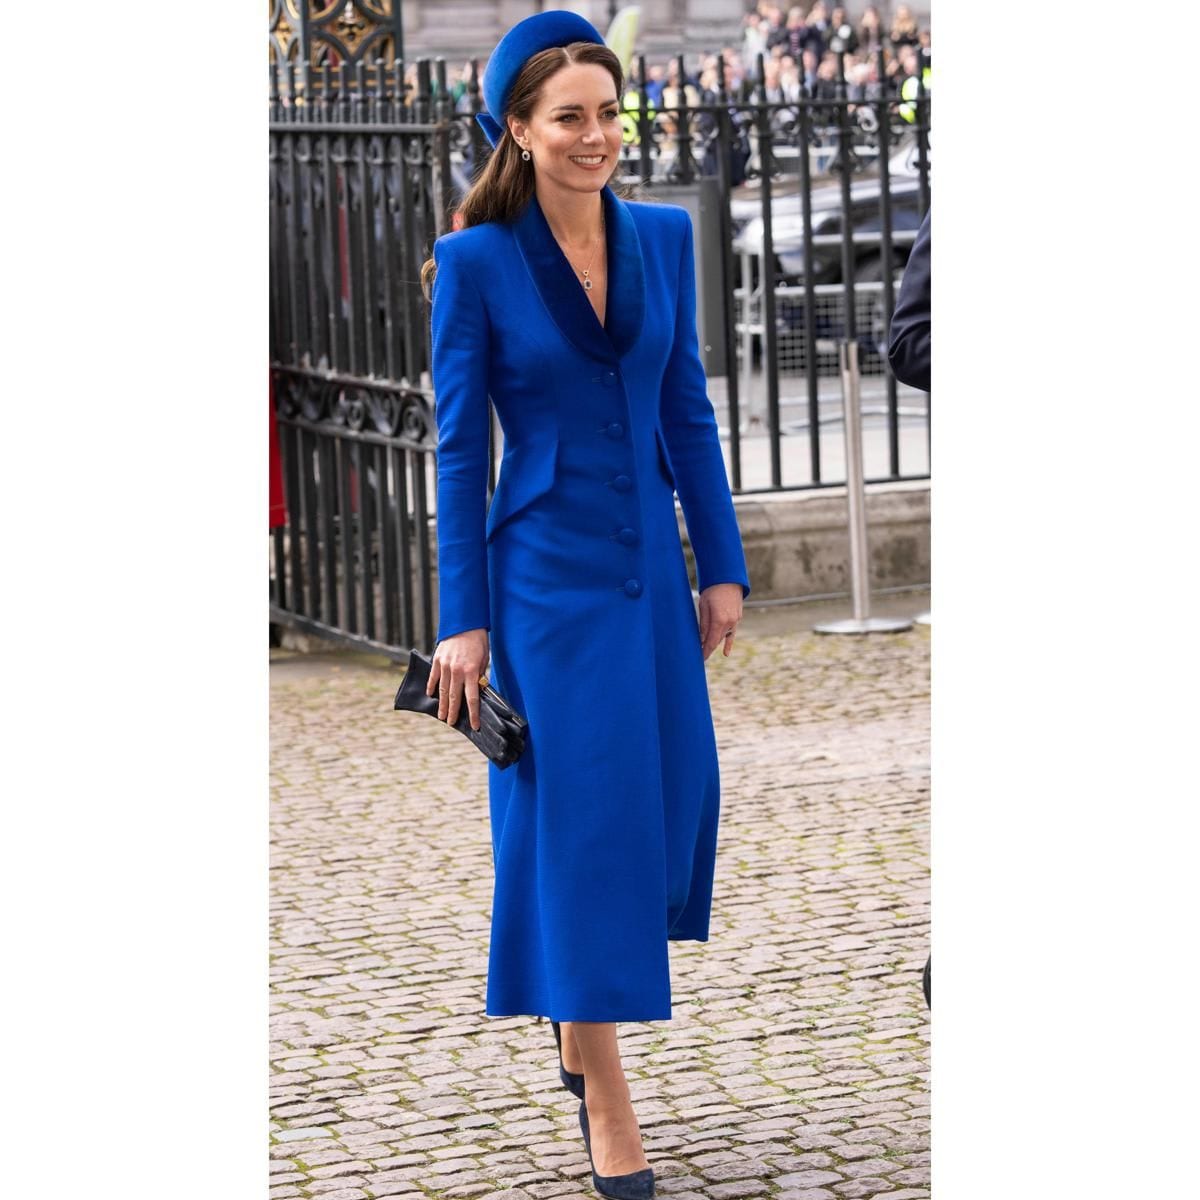 The Duchess of Cambridge stunned in head to toe blue on Commonwealth Day